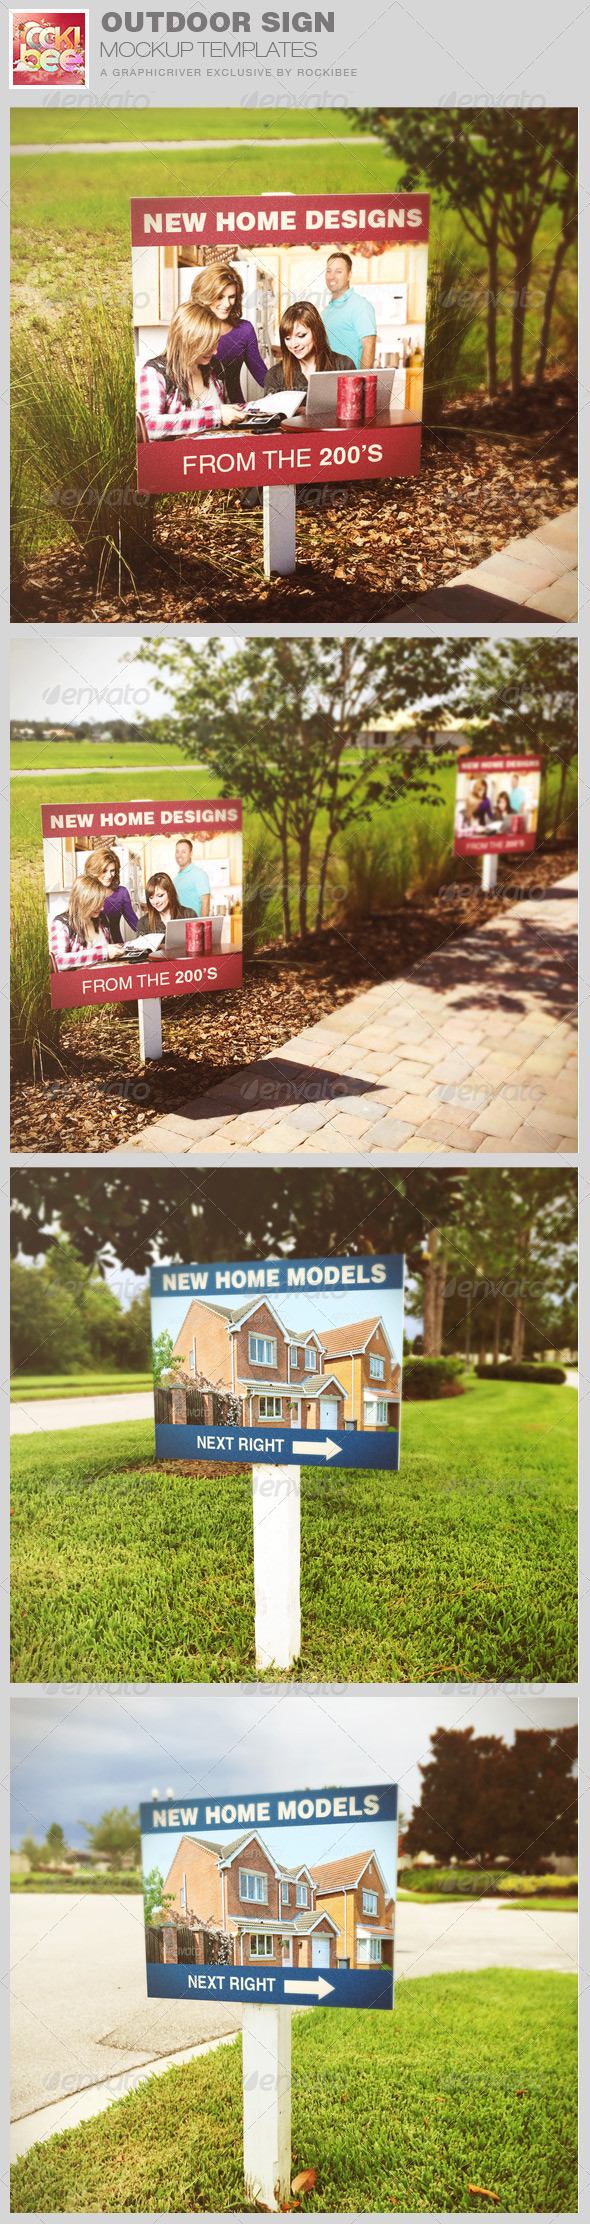 Outdoor sign mockup template image preview